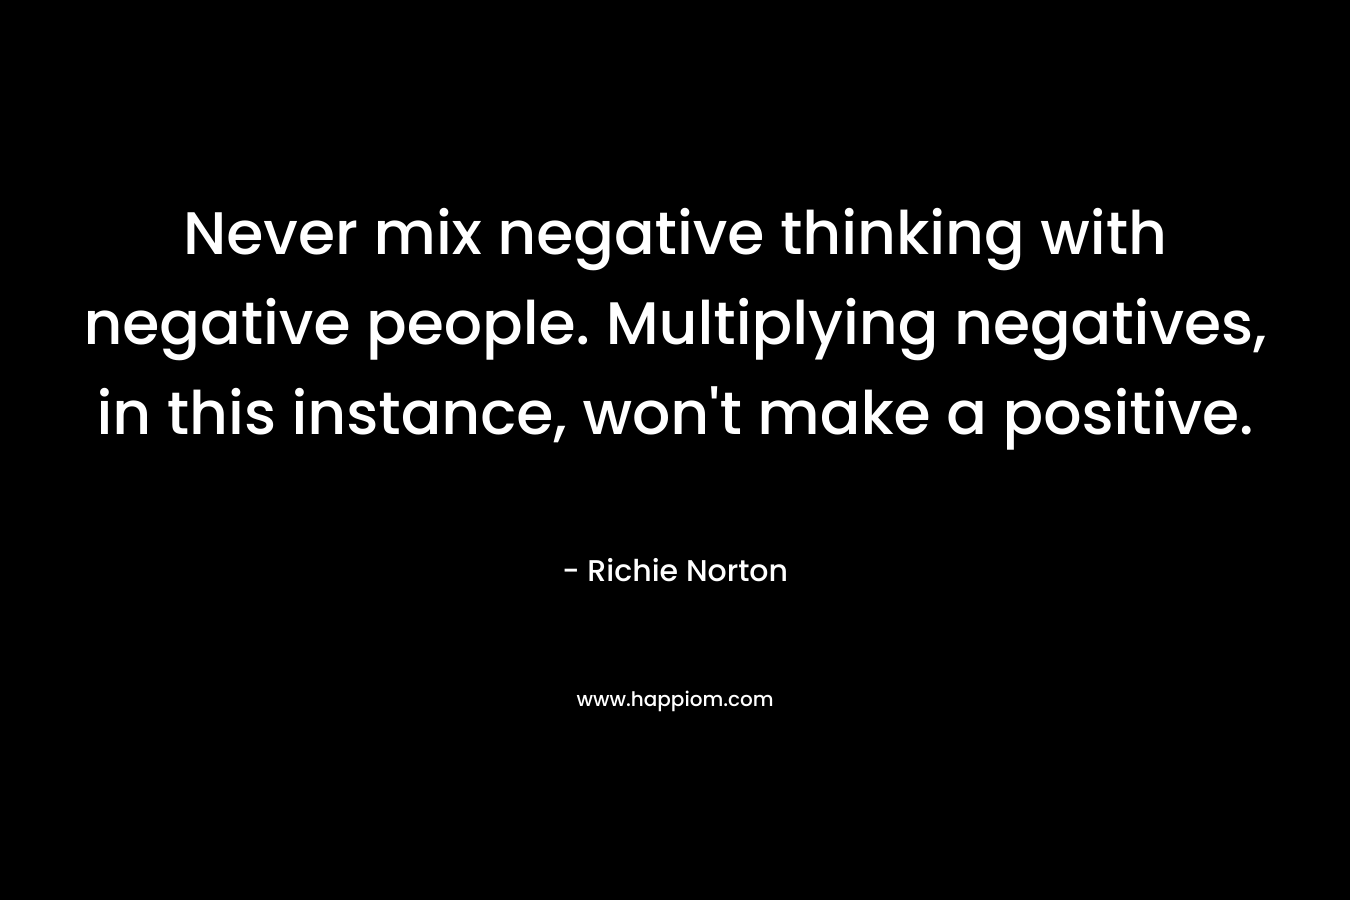 Never mix negative thinking with negative people. Multiplying negatives, in this instance, won’t make a positive. – Richie Norton